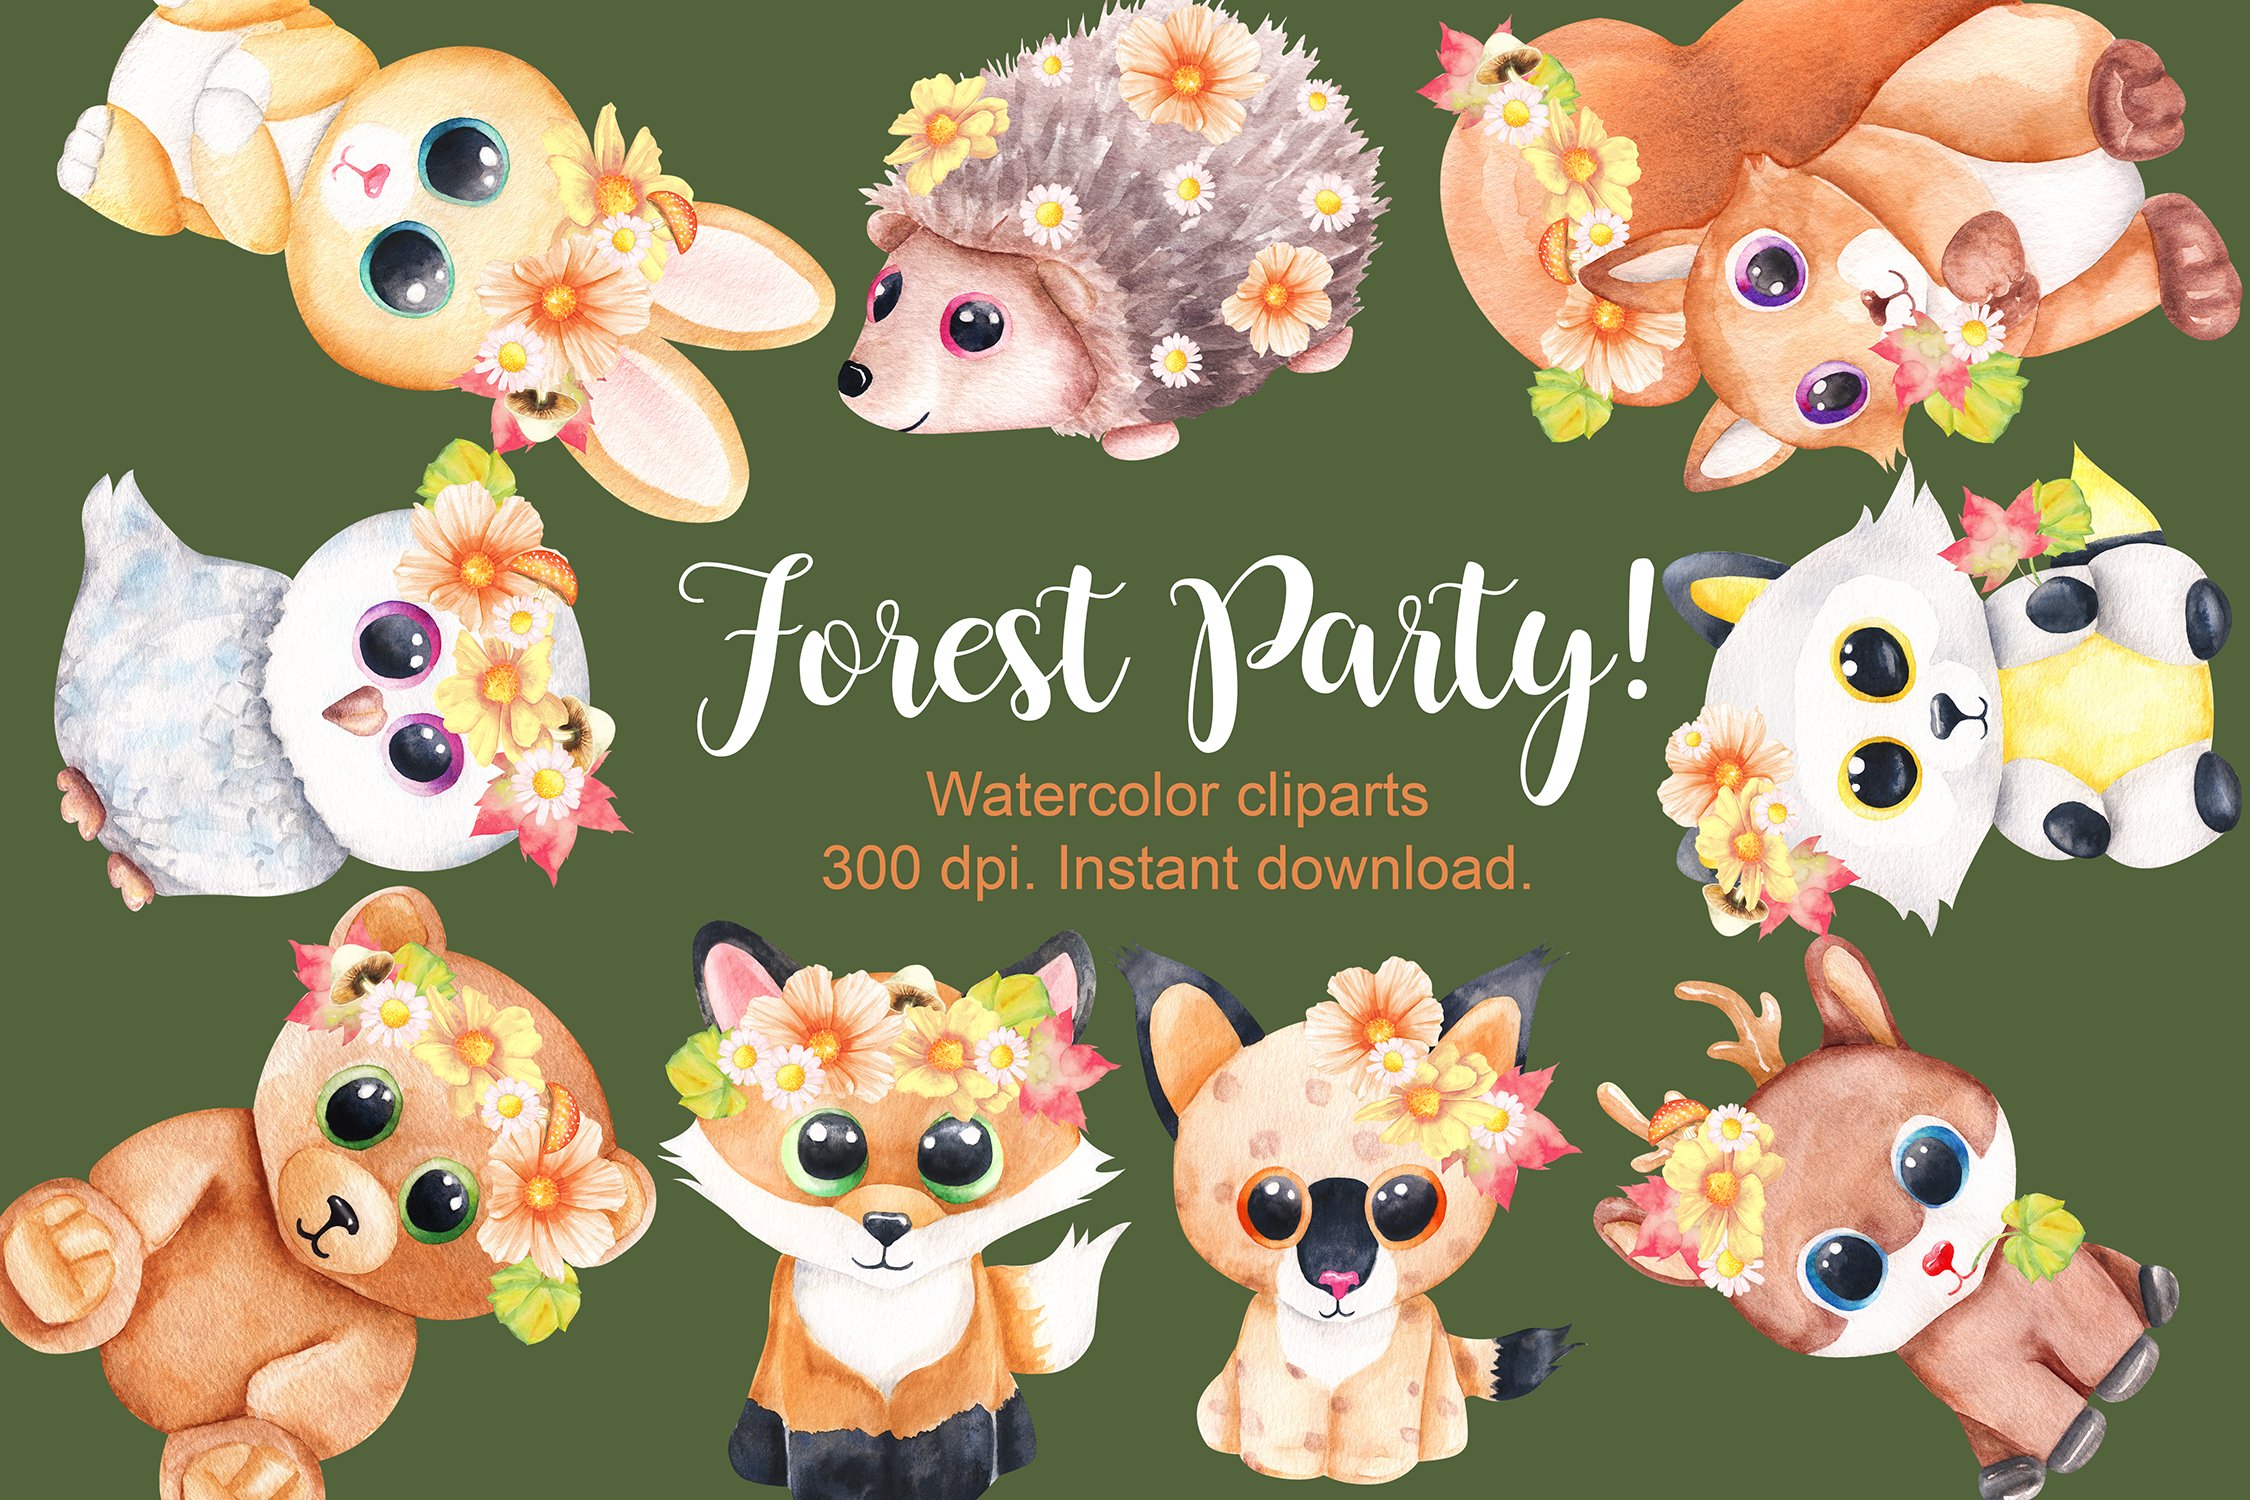 Animals and flowers cliparts preview image.